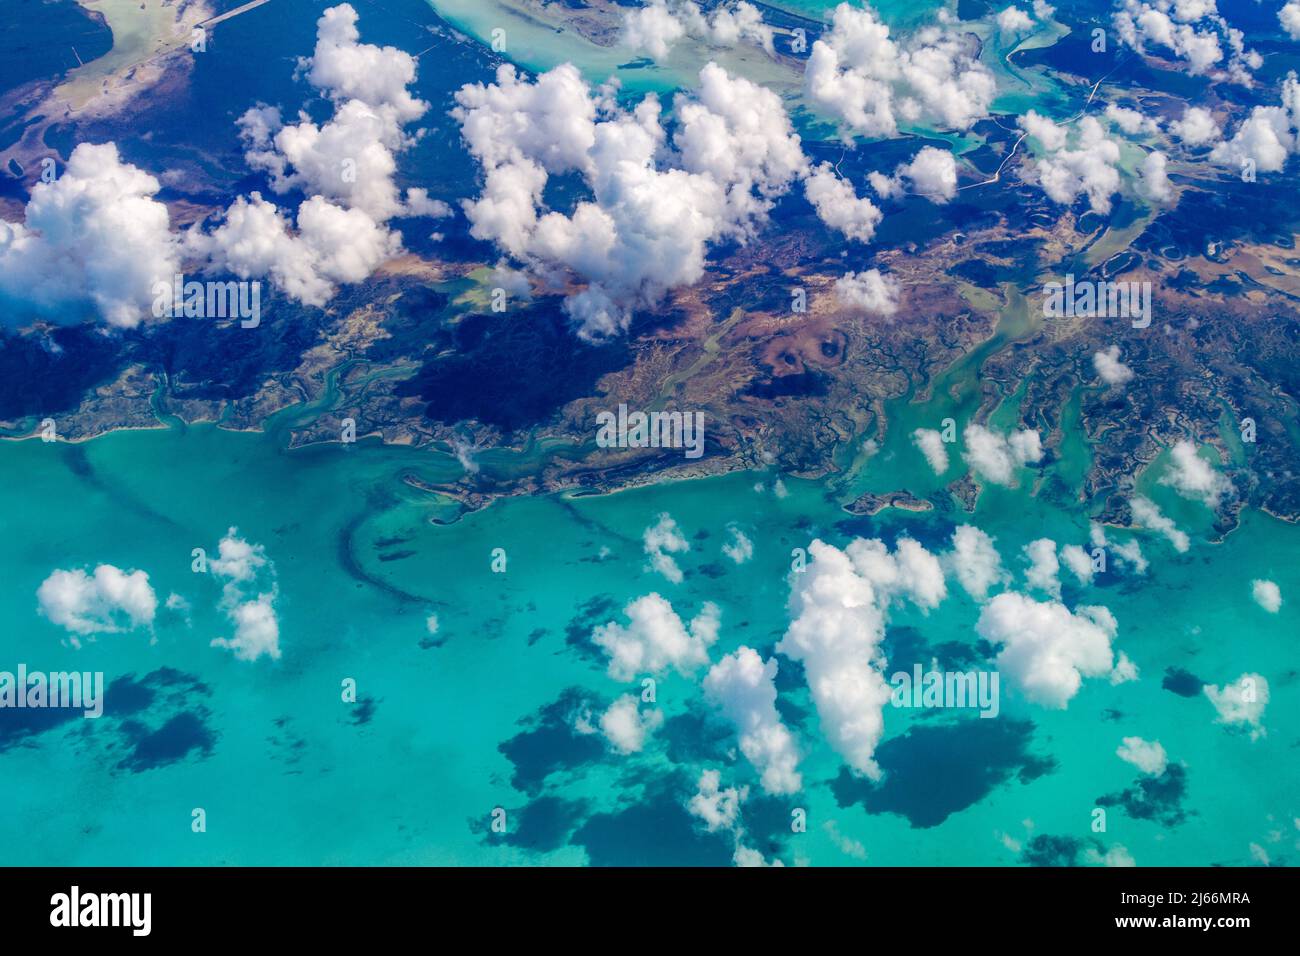 High aerial view of clouds over the Caribbean Sea and islands of the tropics from a commercial airliner Stock Photo